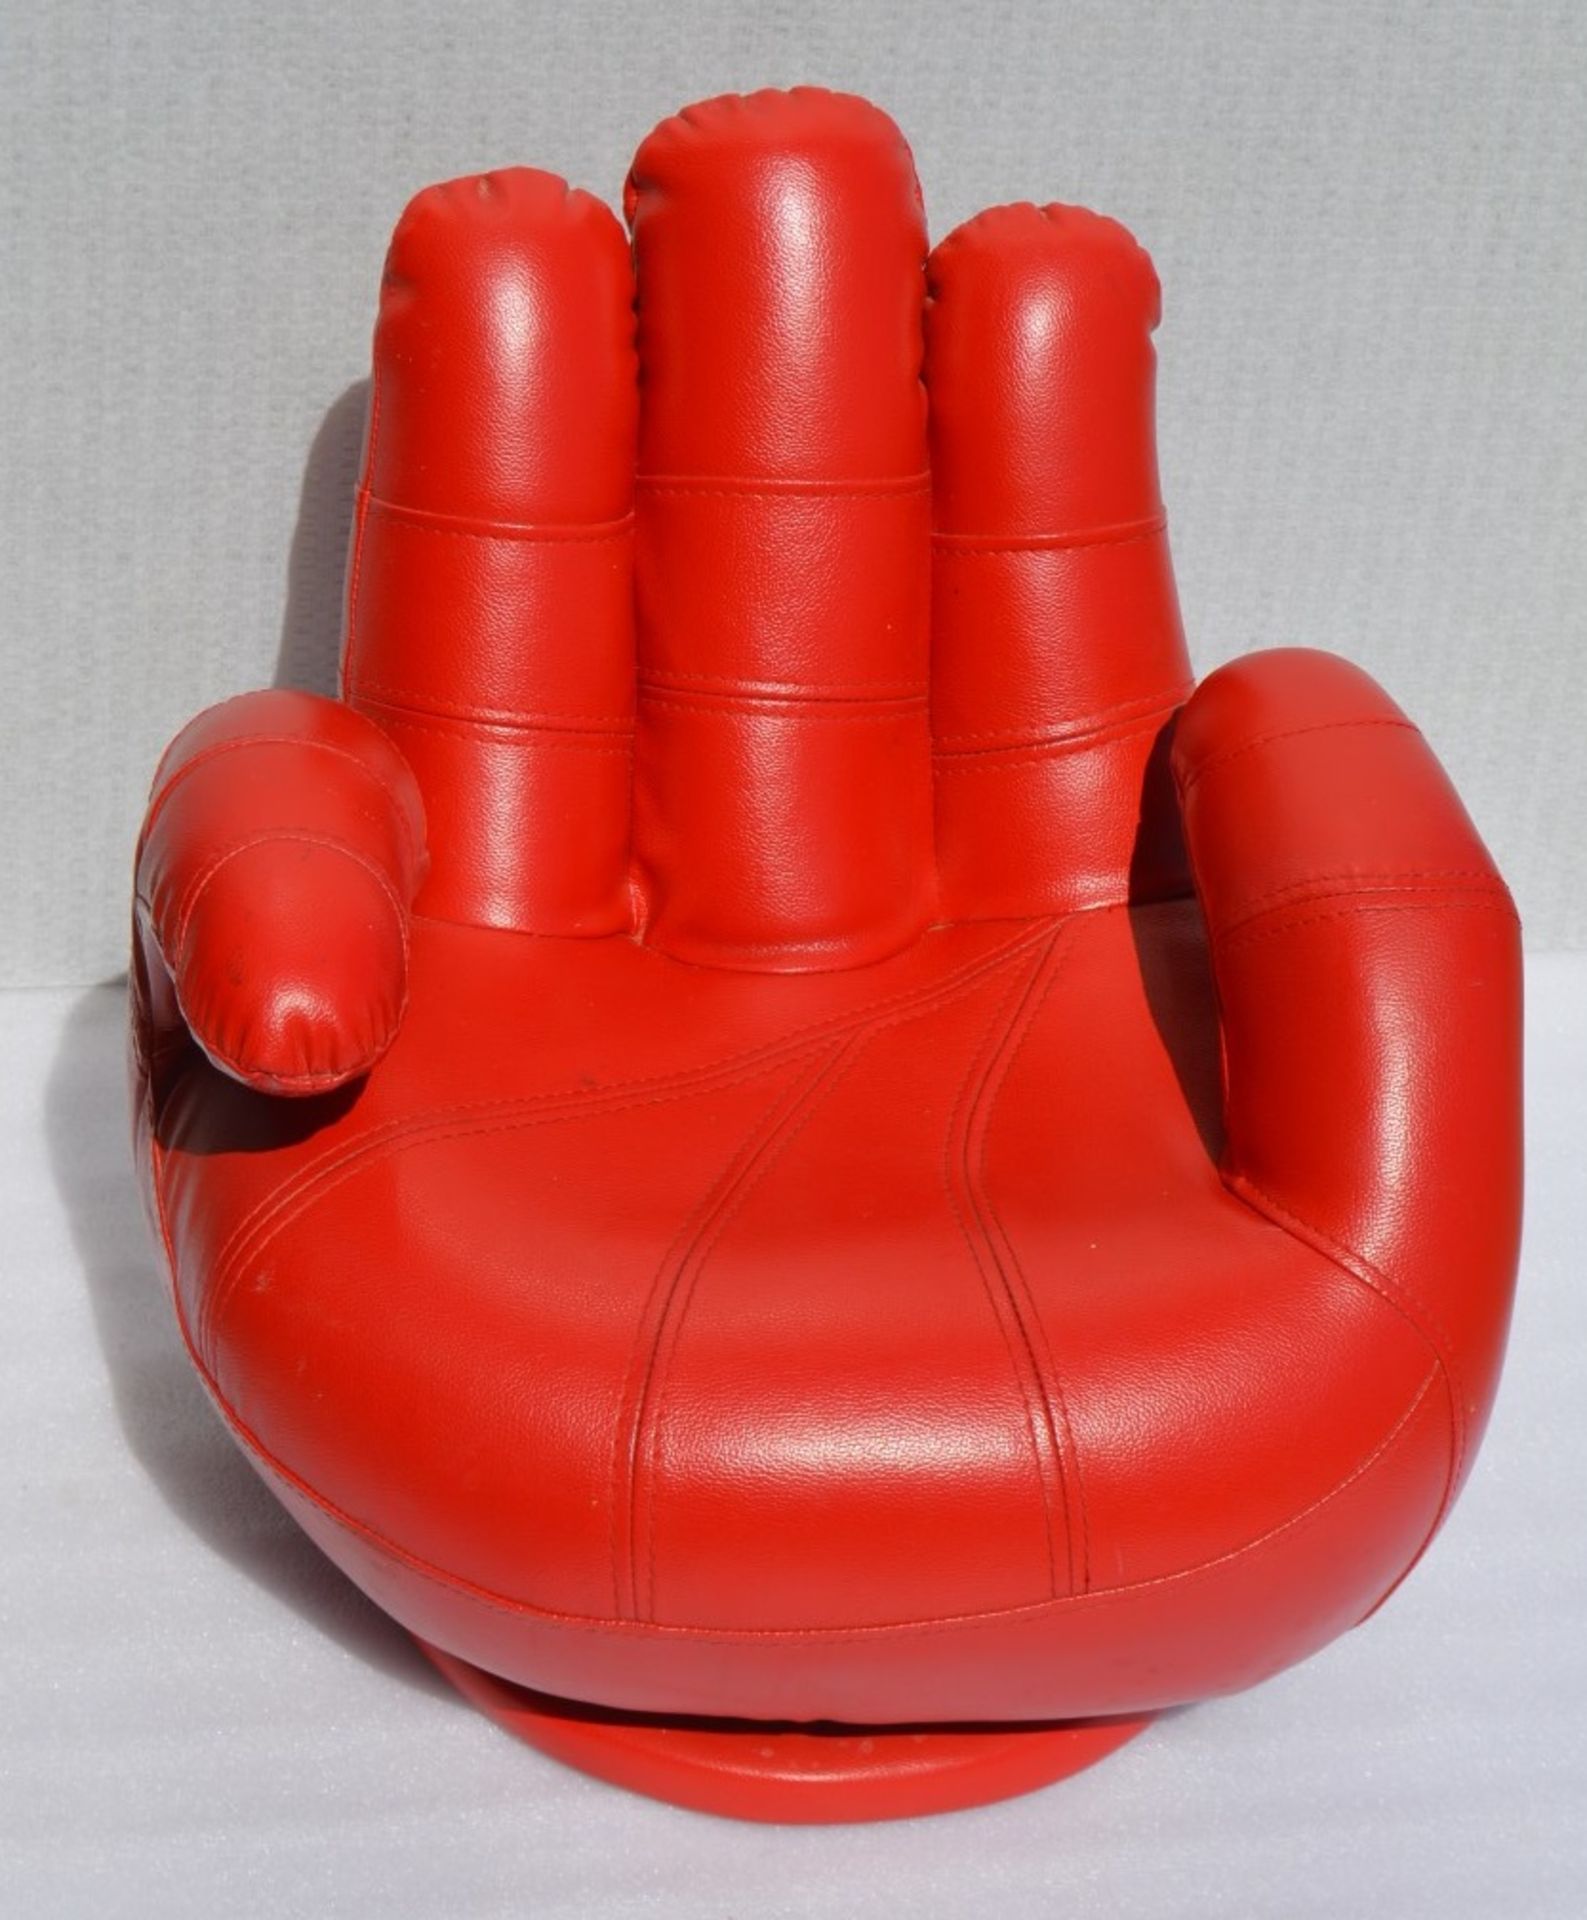 1 x Red Leather Small “HAND” Seat - From An Exclusive Property In Hale Barns - Dimensions: H55 x W50